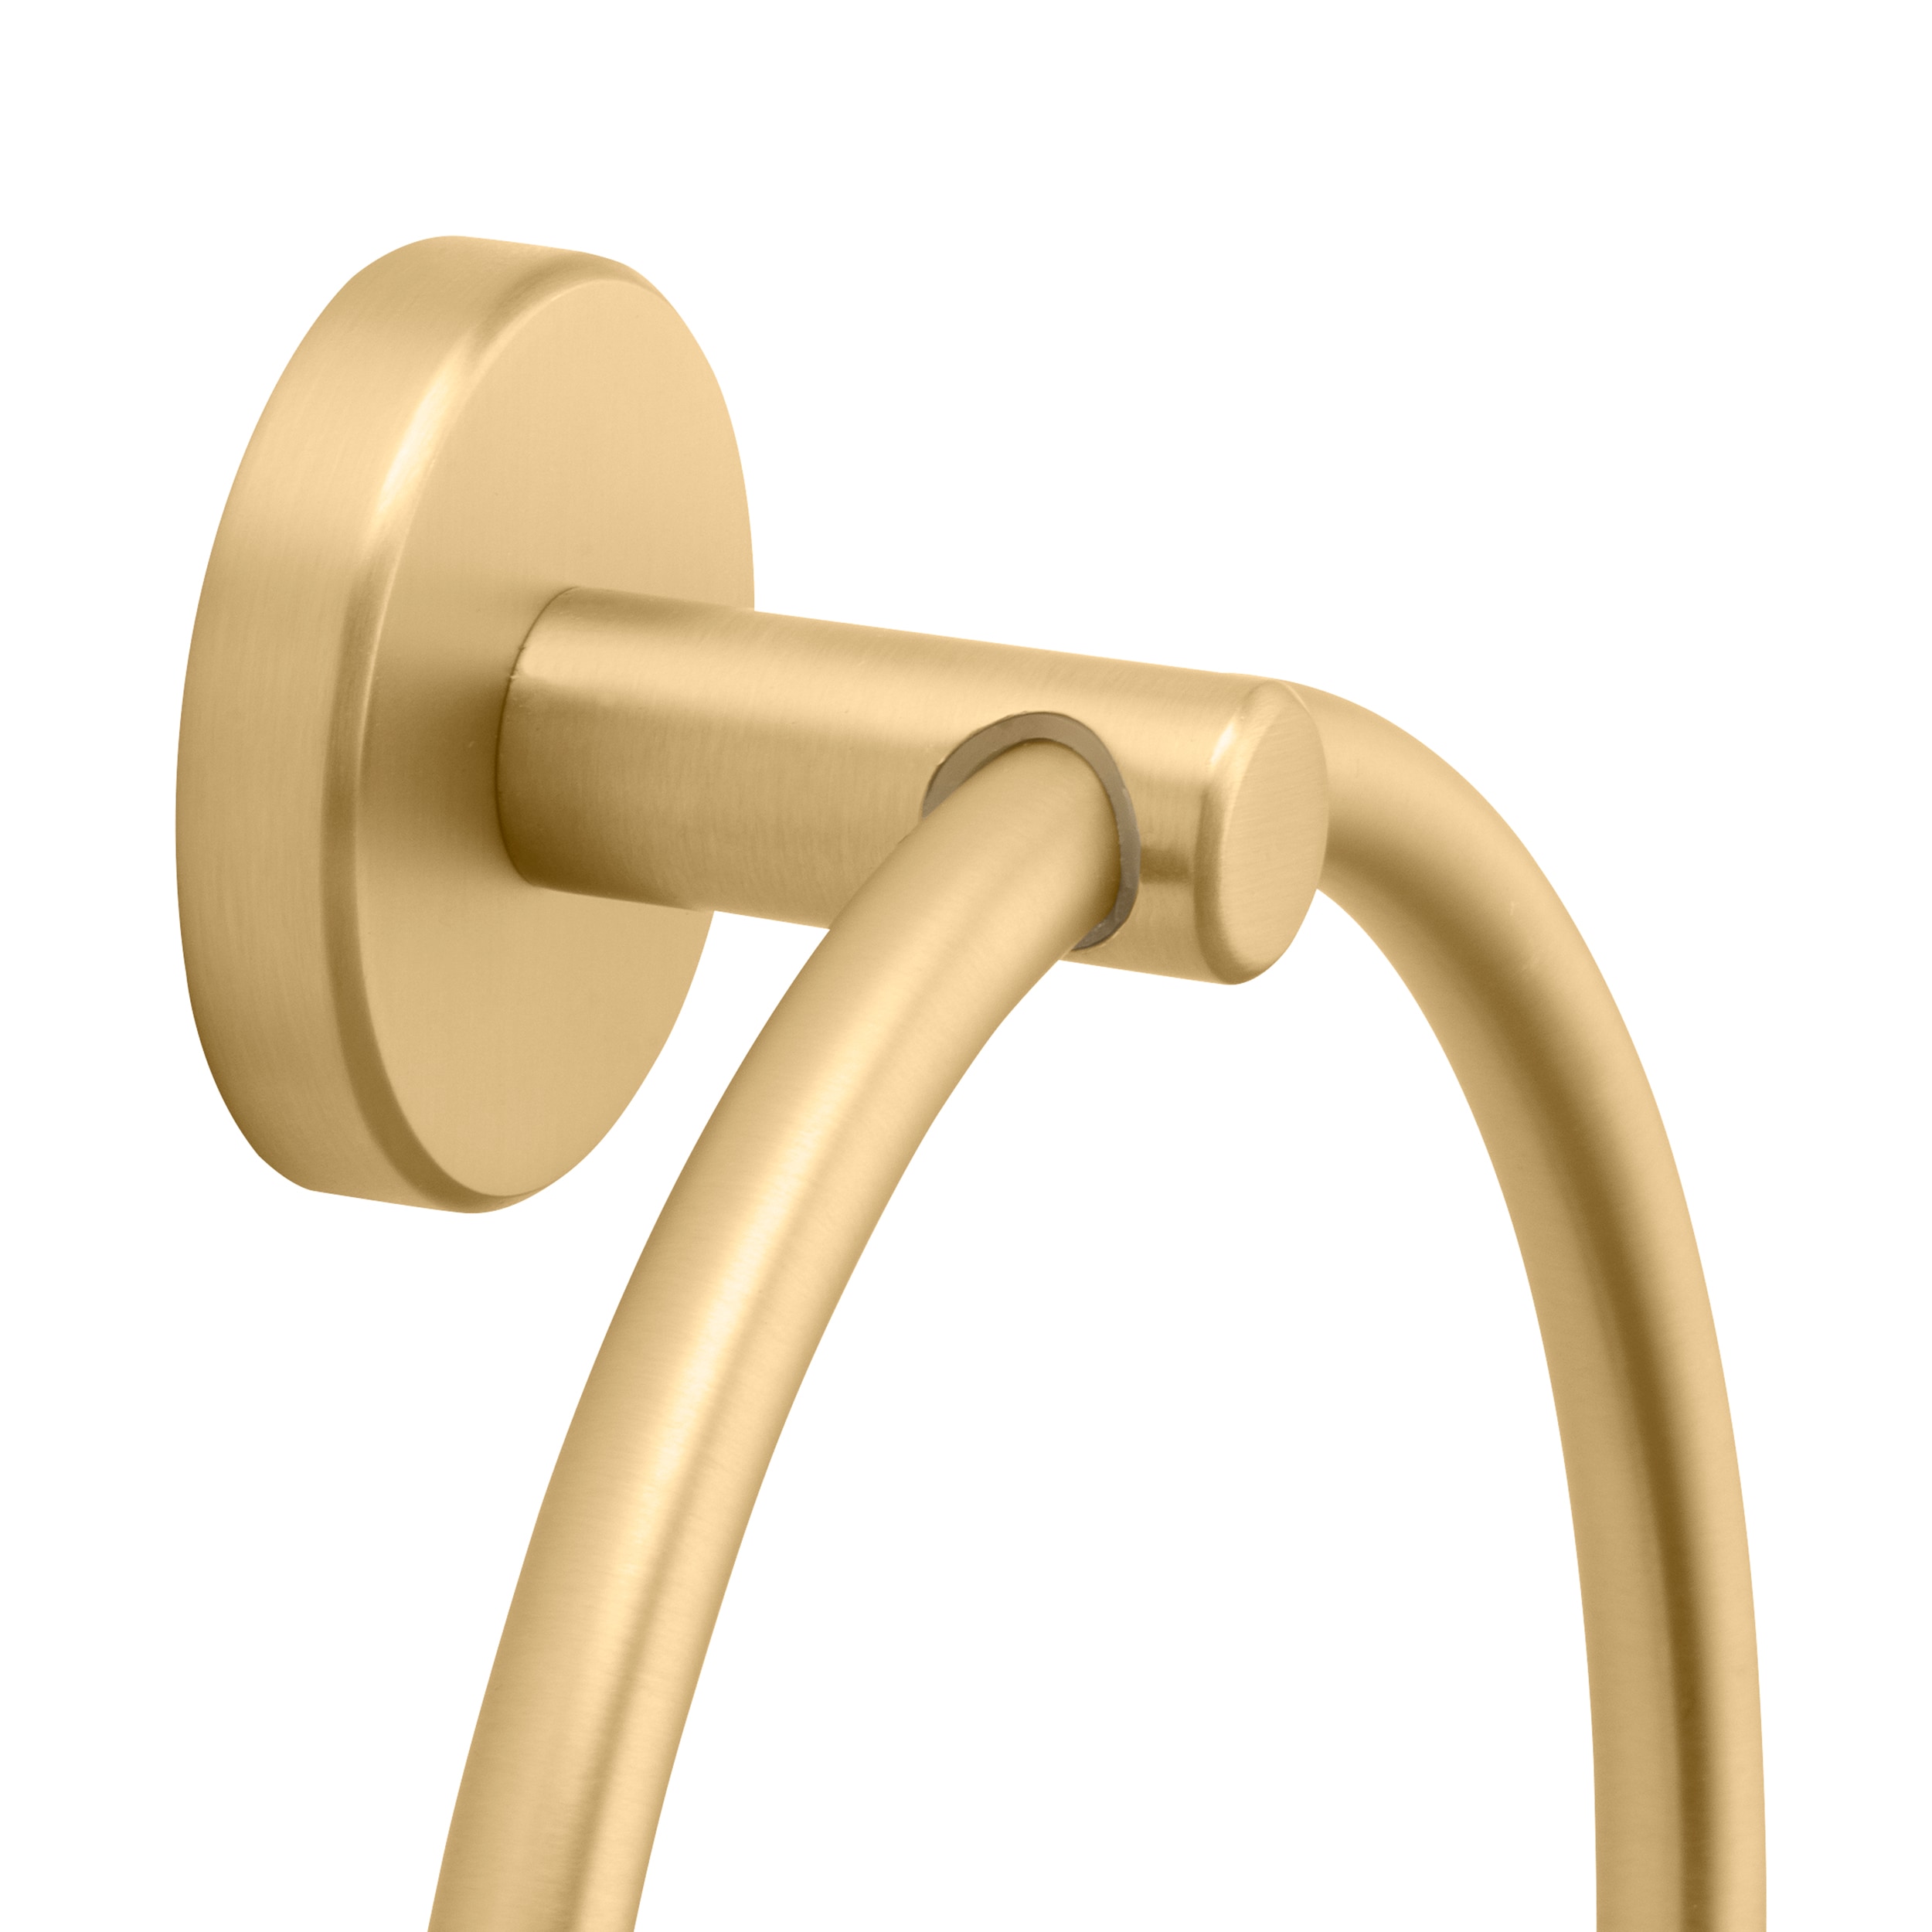 allen + roth Harlow Gold Wall Mount Single Towel Ring